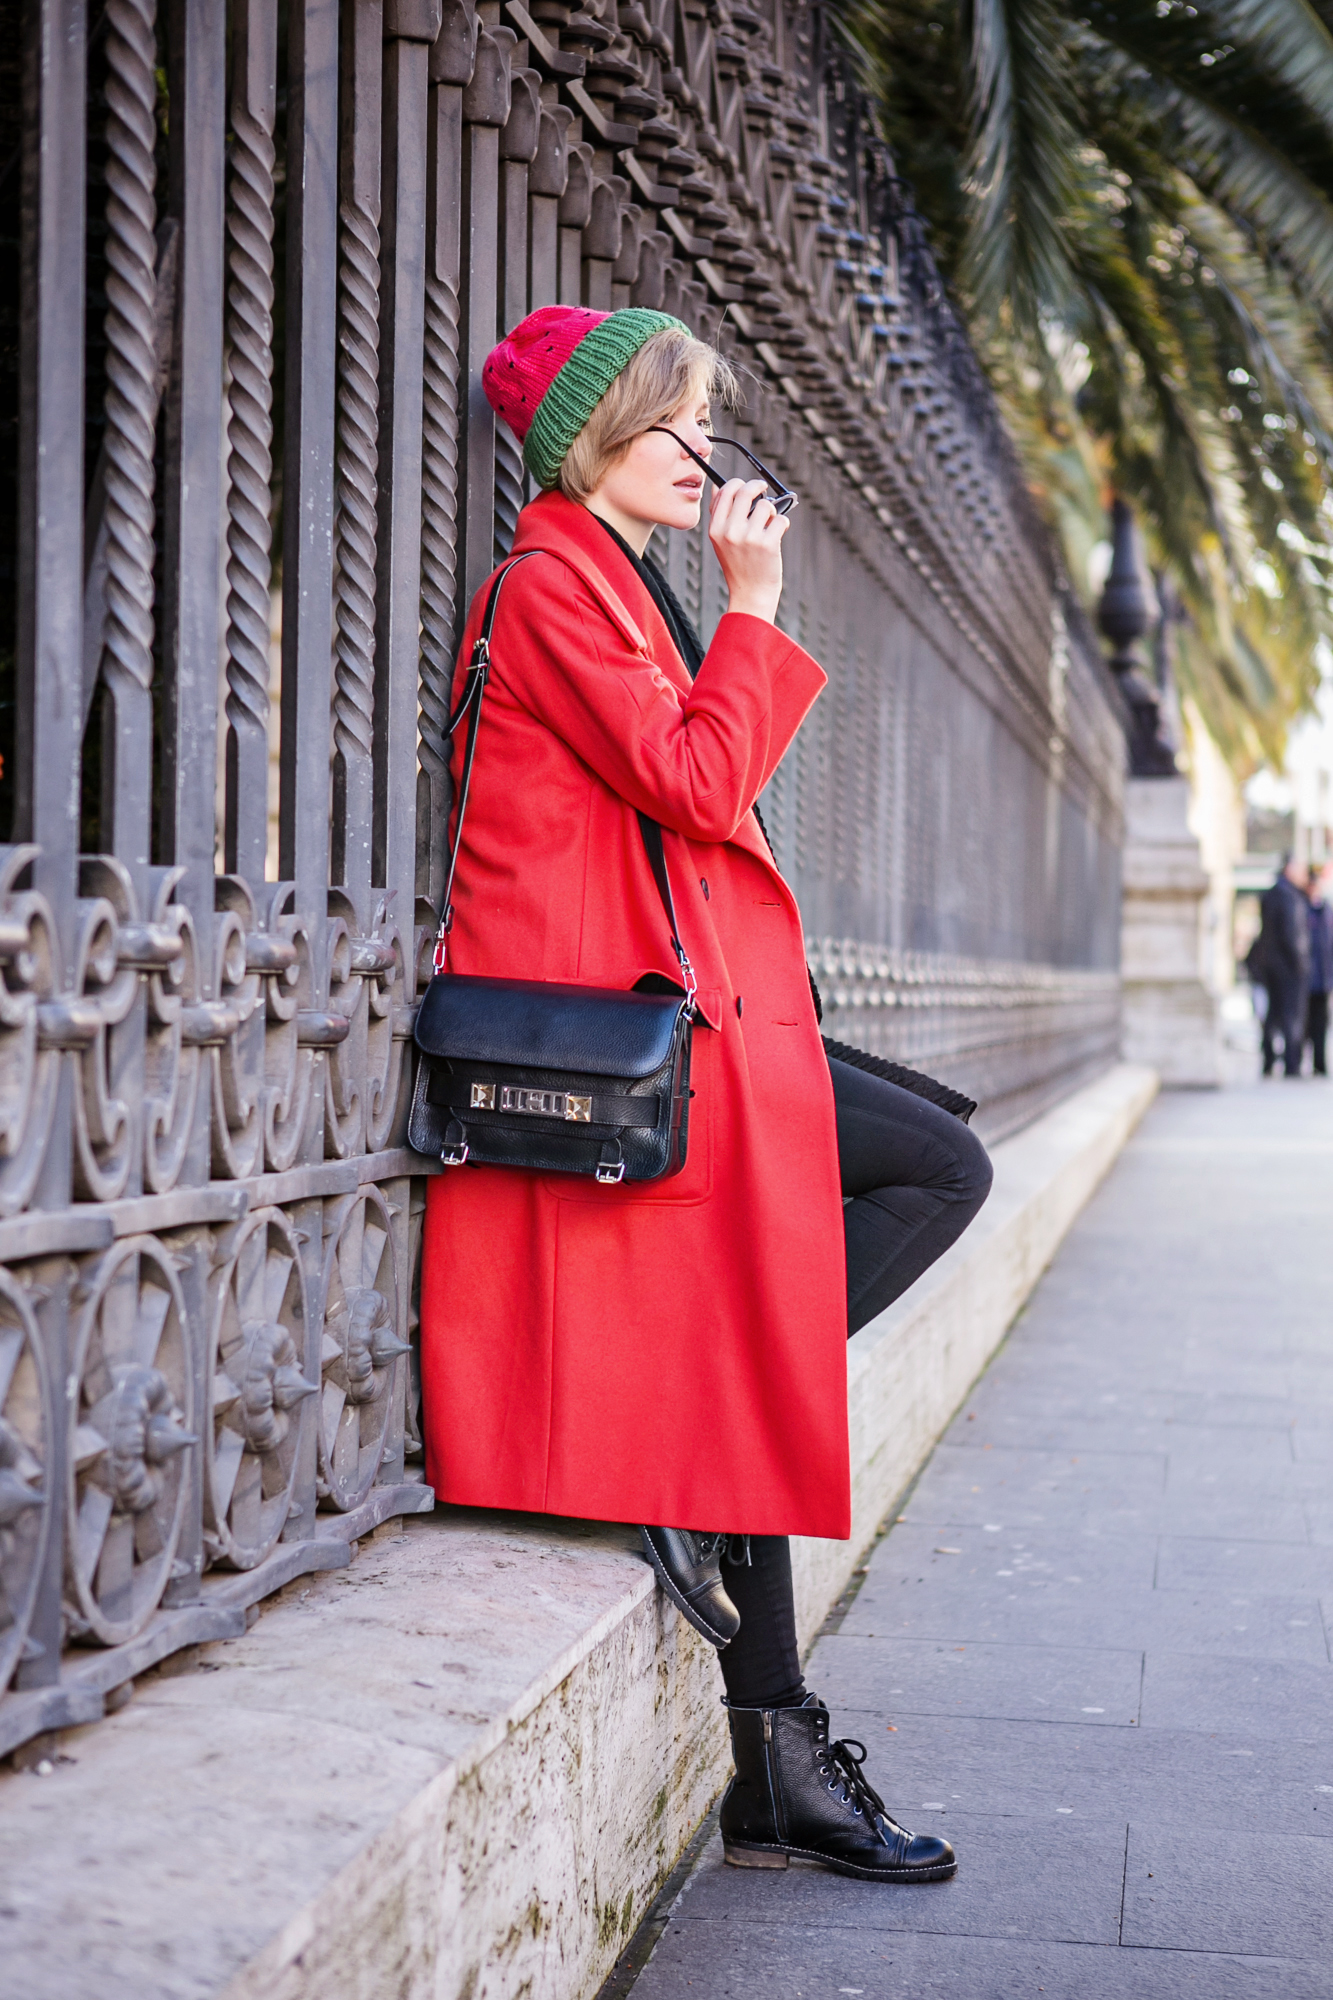 darya kamalova thecablook russian italian fashion bogger street style trend asos long red coat watermelon hat proenza schouler ps11 bag dr denim jeans rome roma centro storico le bunny blue booties italia italy-10 copy